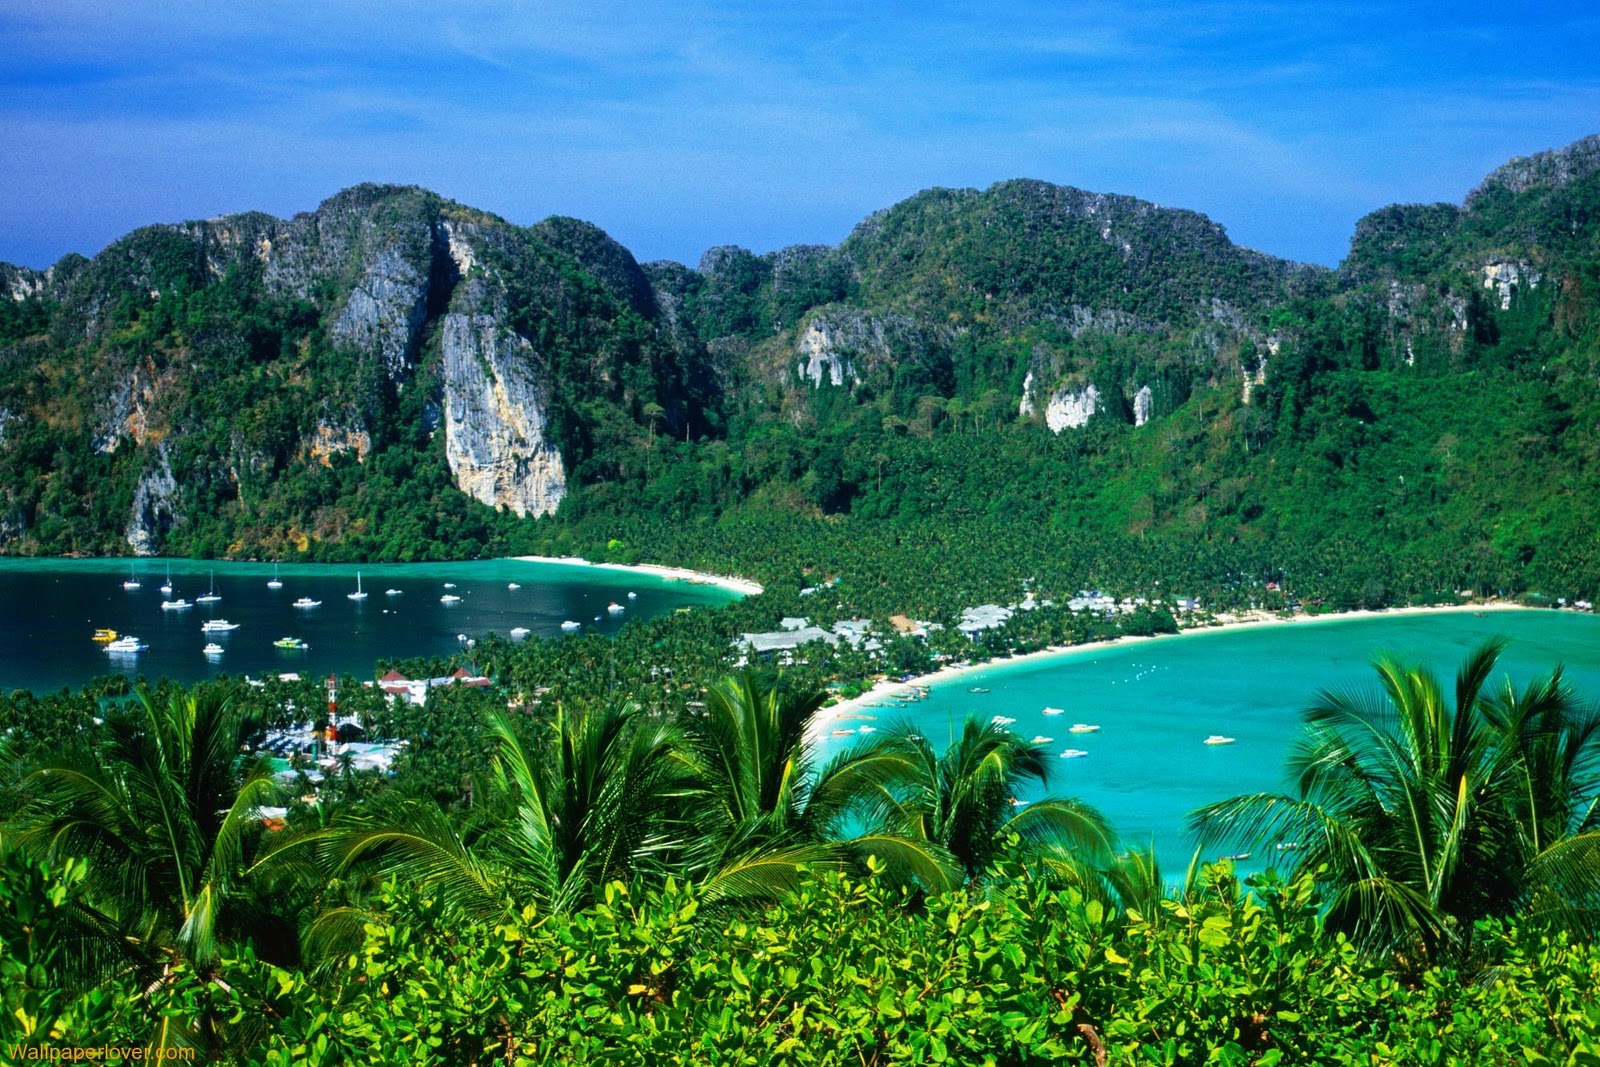 Best Holiday Destinations in the World: April 2011